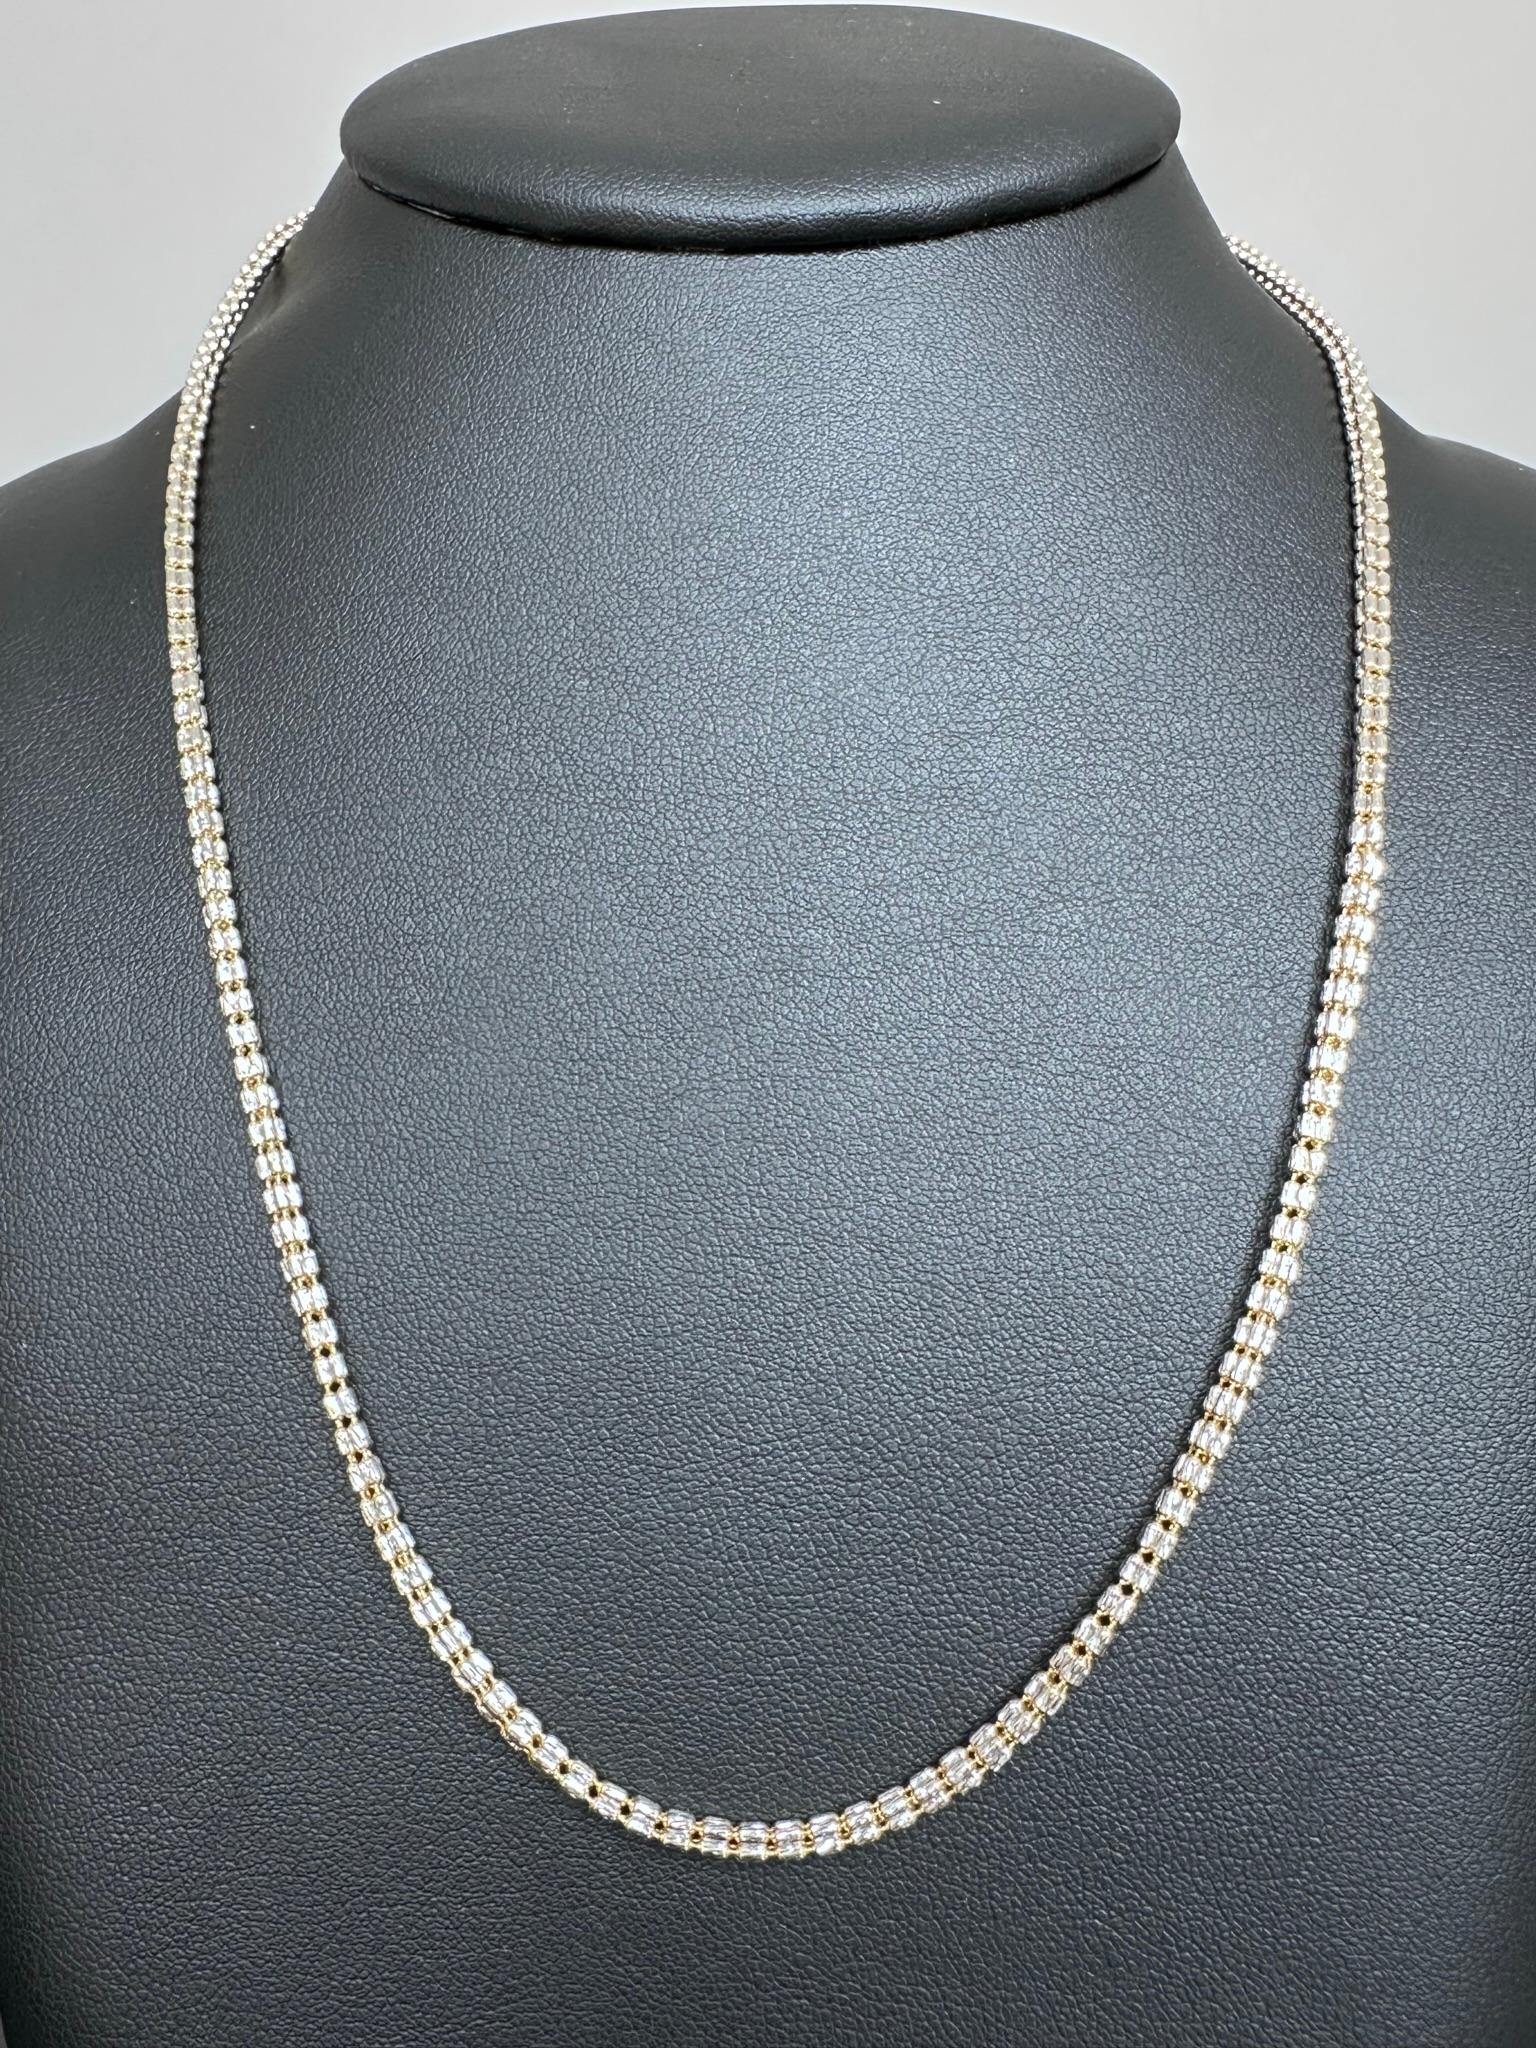 Women's or Men's Swiss Vintage 18kt Yellow and White Gold Necklace For Sale